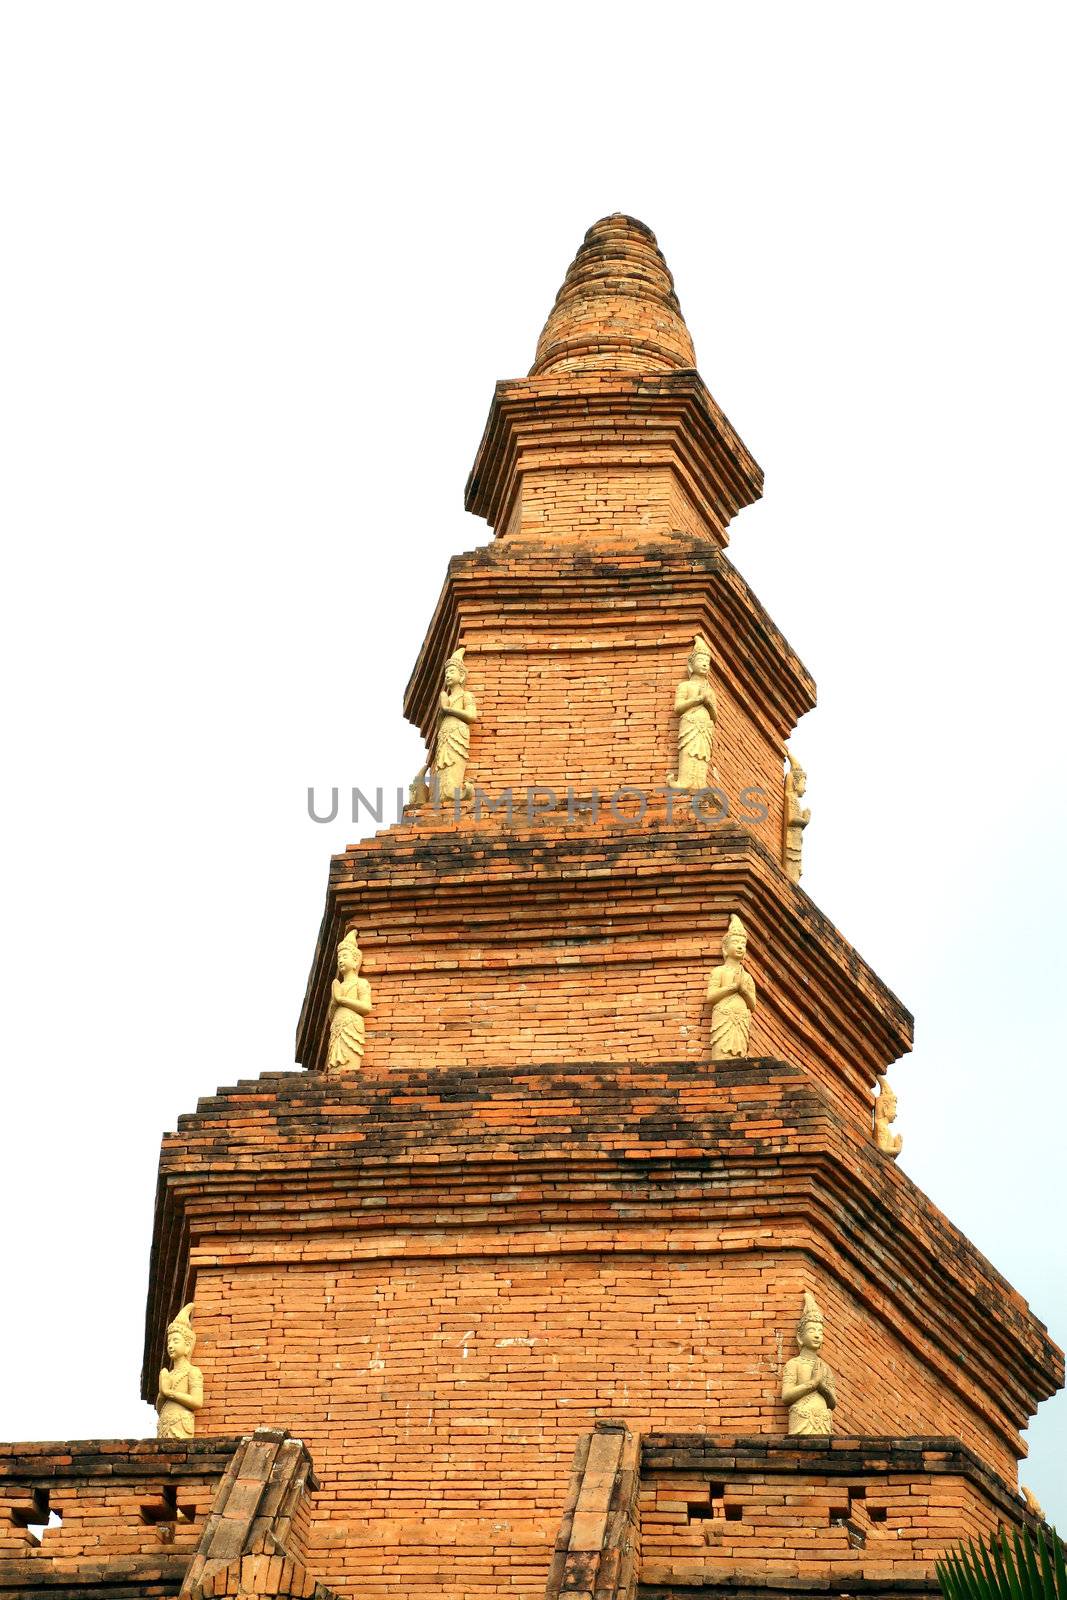 Buddha tower build from red brick